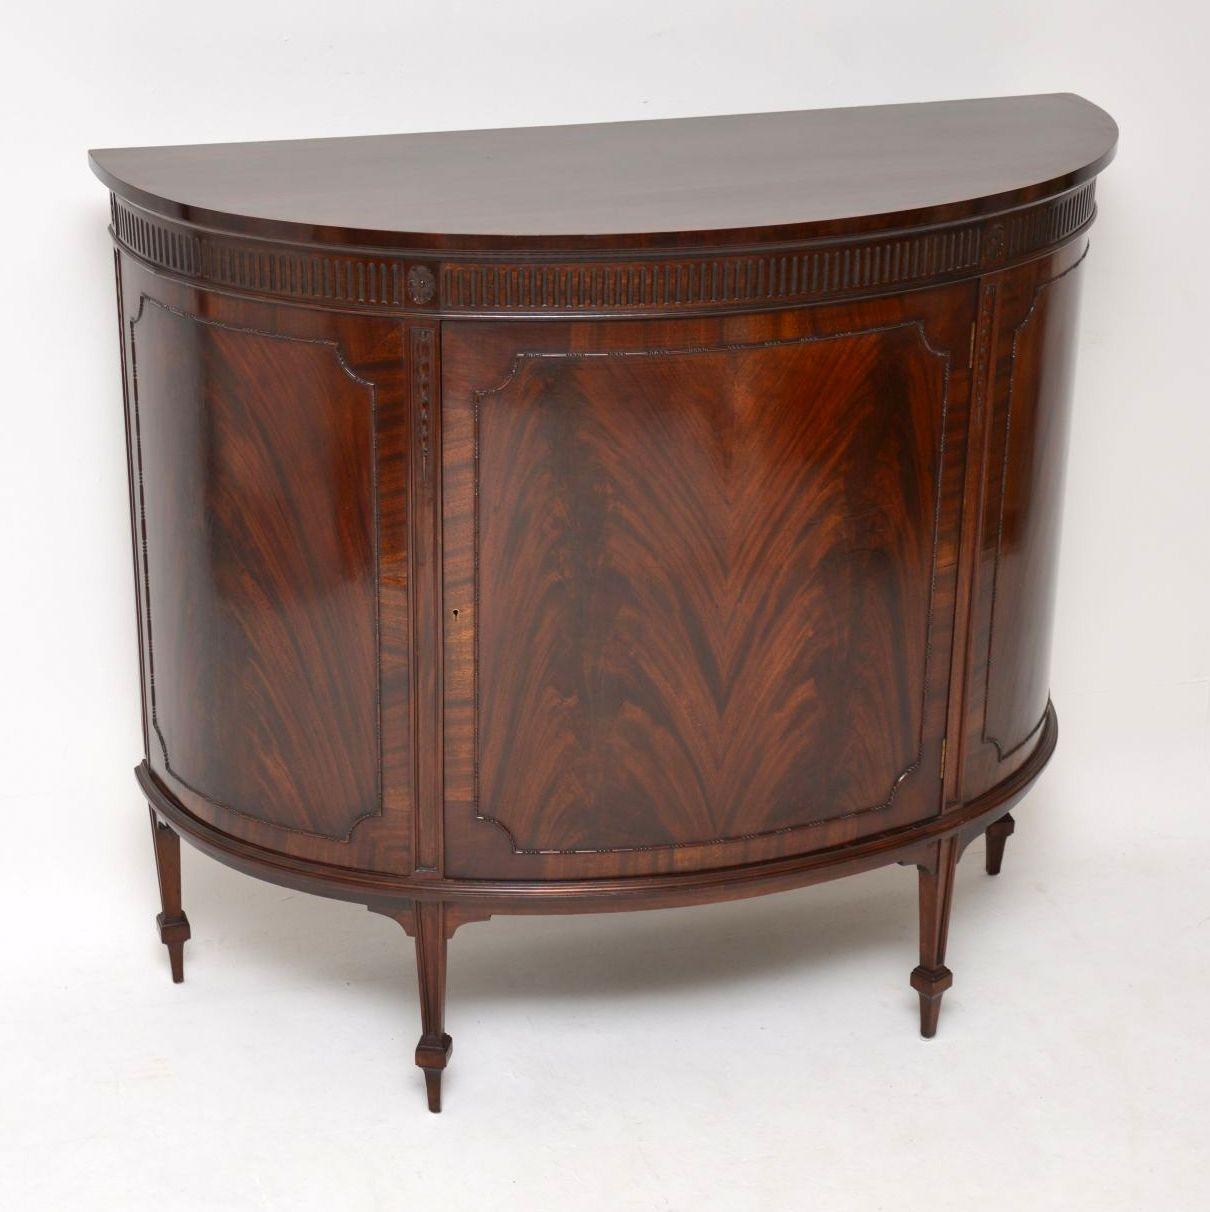 Antique Edwardian mahogany bow fronted cabinet with plenty of storage inside and in excellent original condition. It’s very elegant and has some fine features. The top is cross banded and has some intricate grooving just underneath. There are four